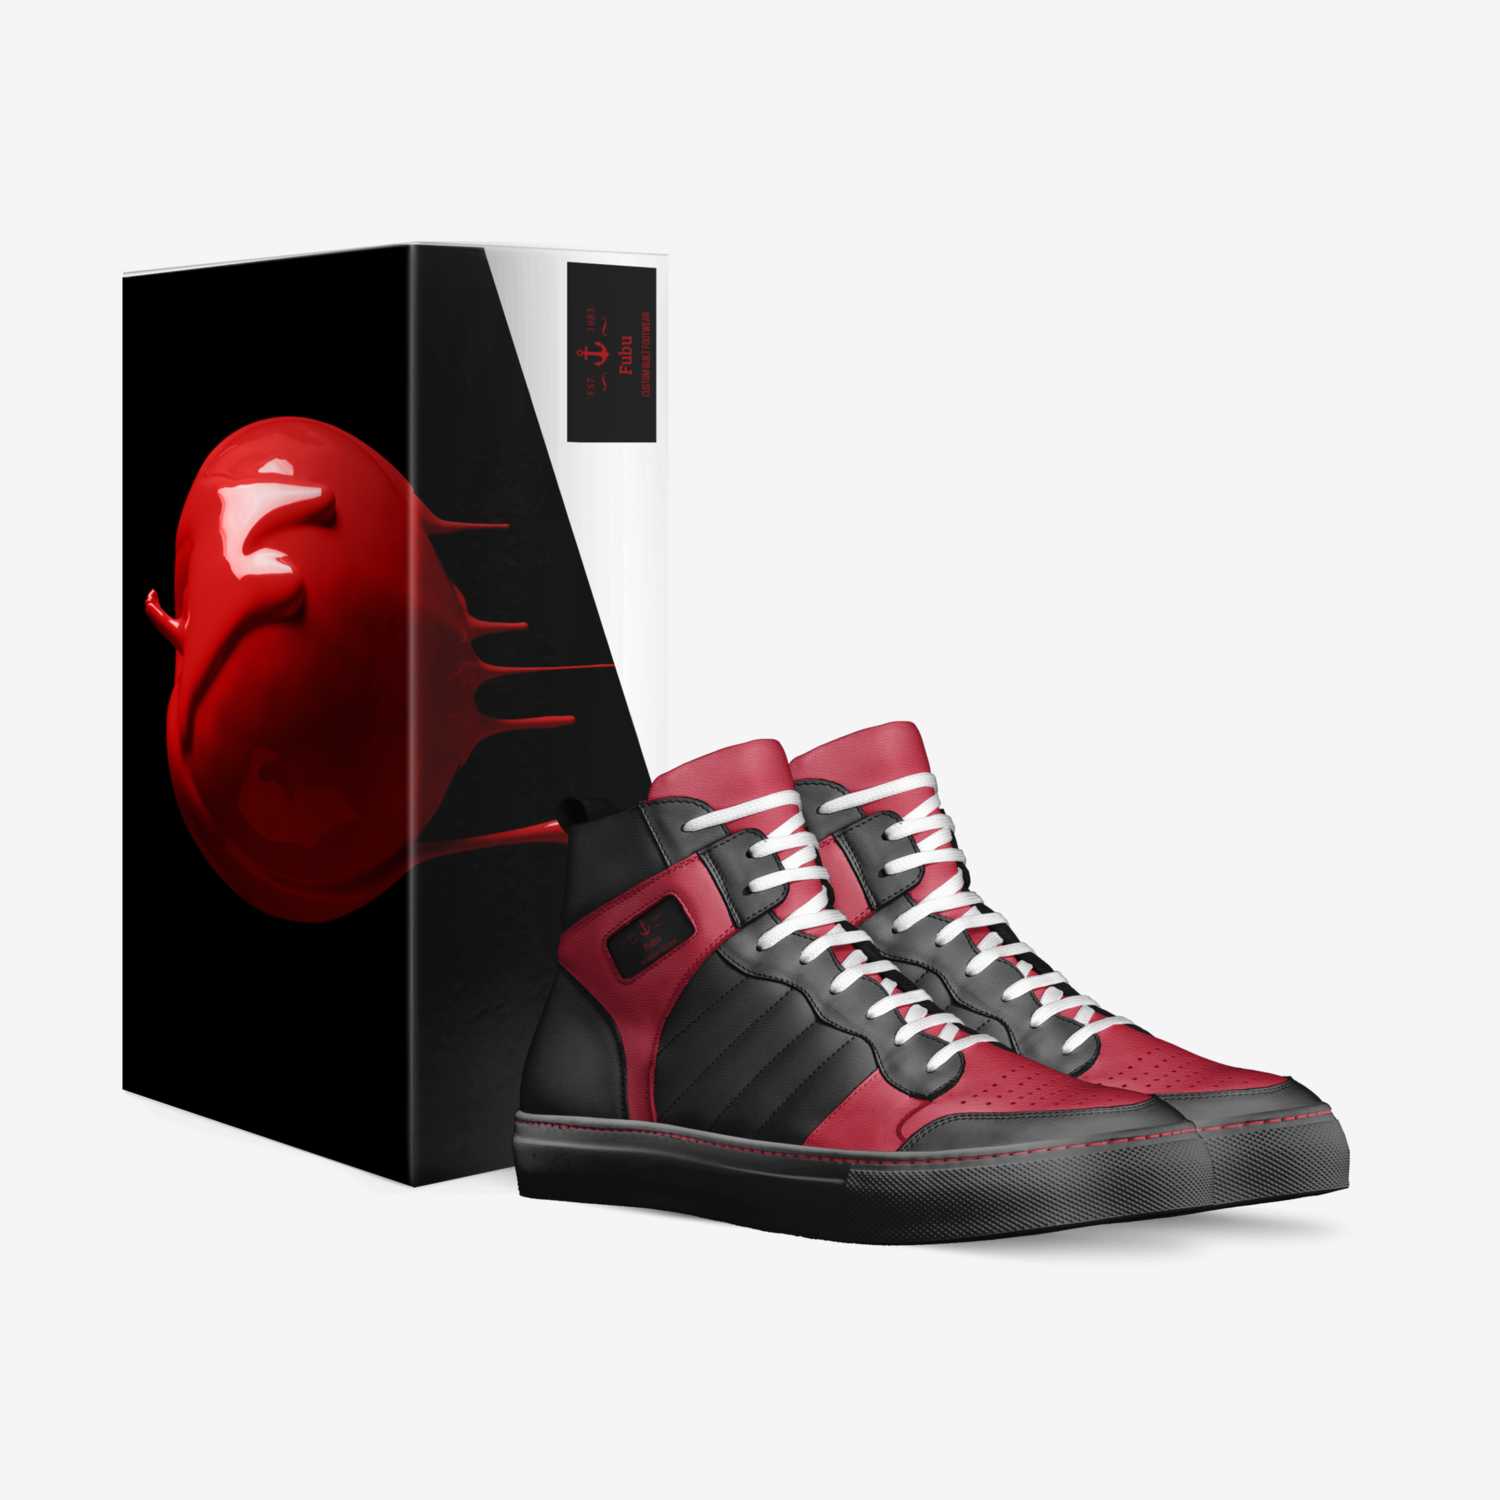 Fubu custom made in Italy shoes by William Alicea-baez | Box view